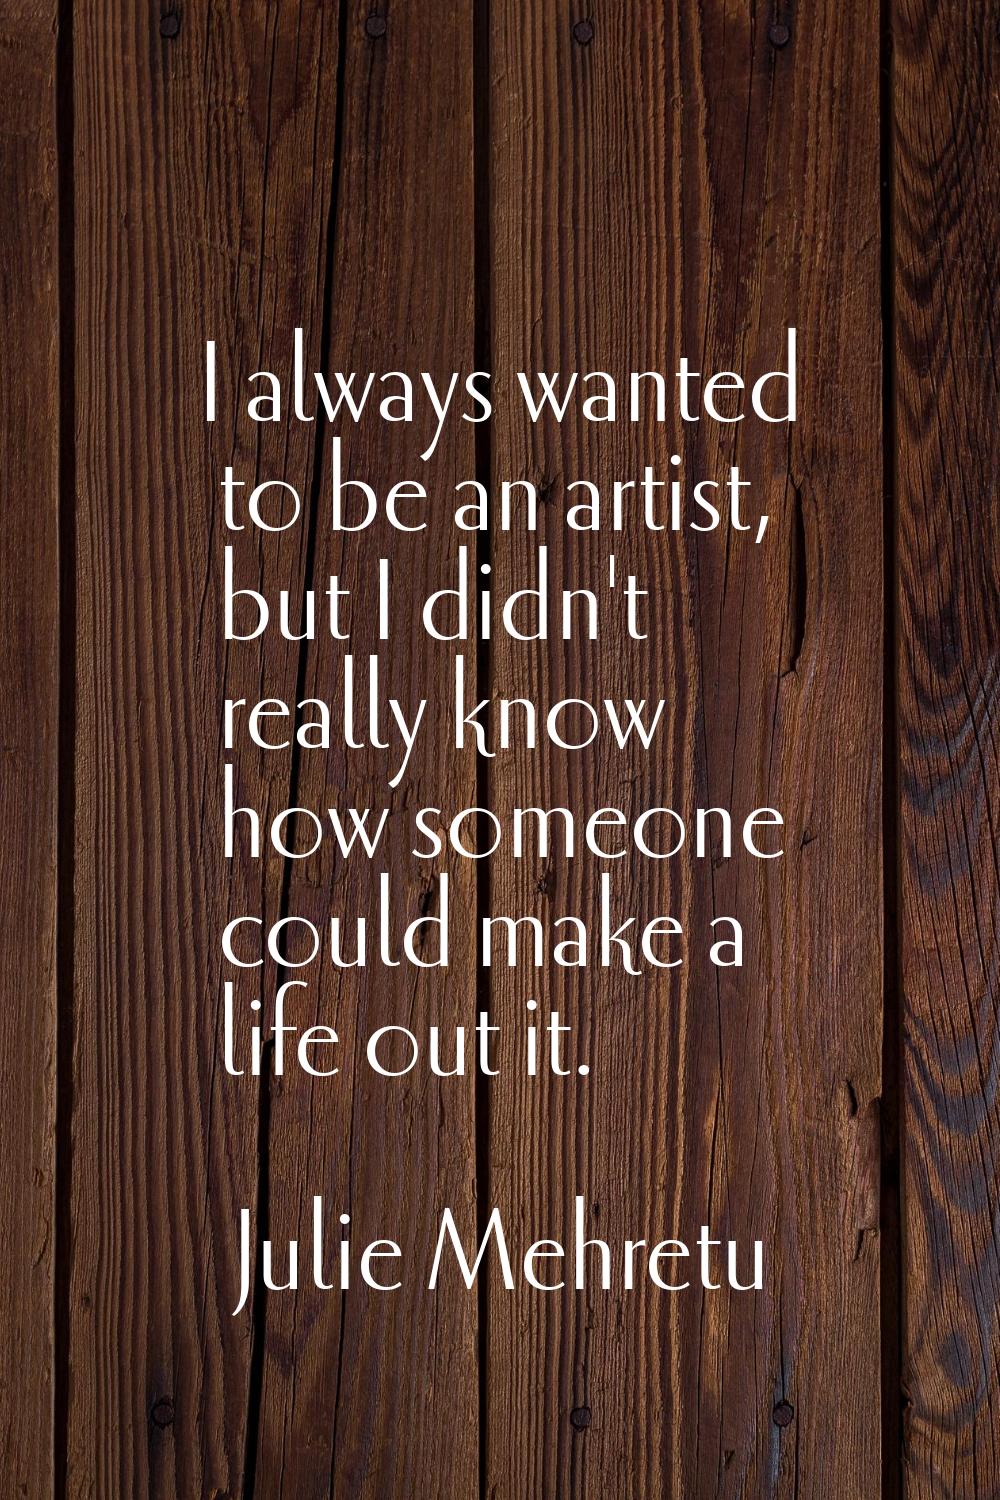 I always wanted to be an artist, but I didn't really know how someone could make a life out it.